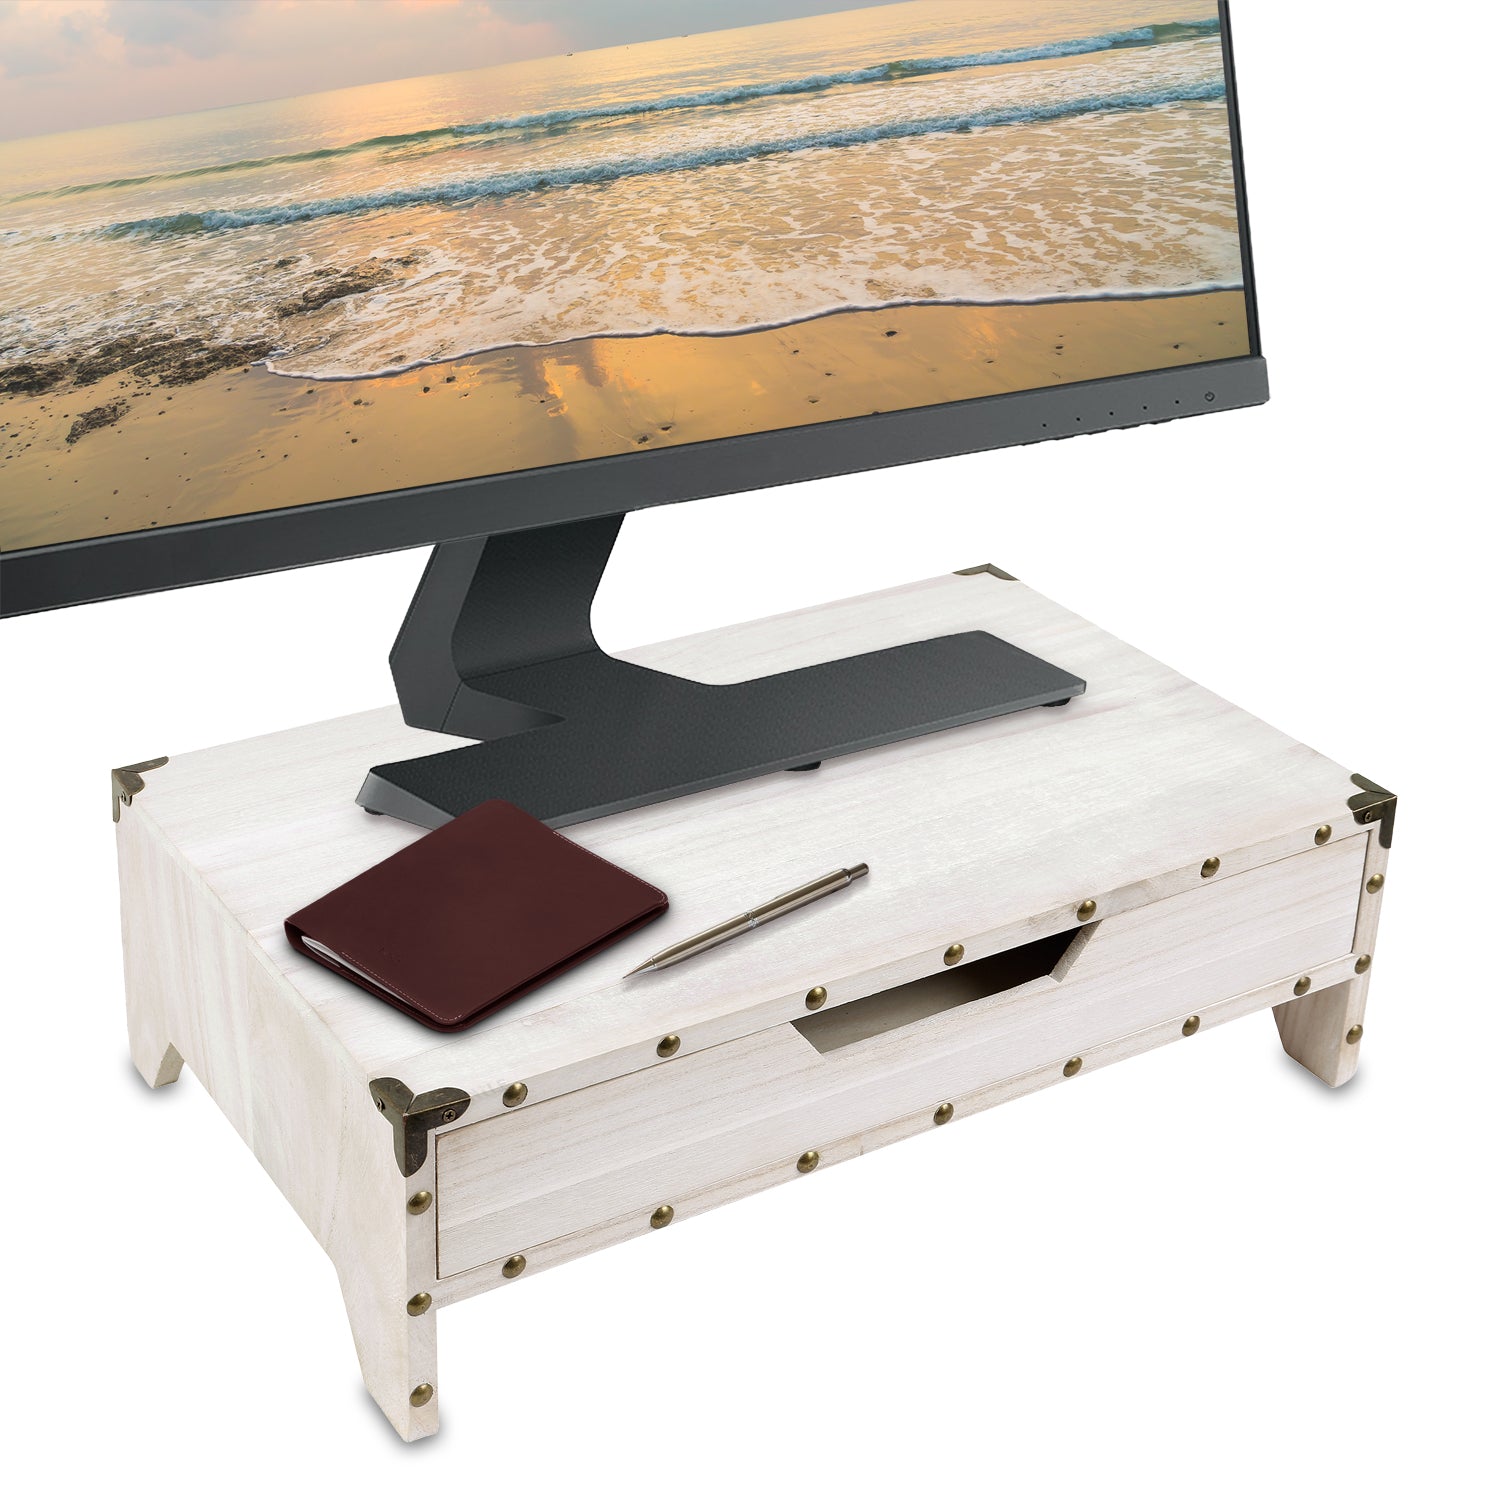 Ikee Design Monitor Stand Riser Desk With Pull Out Drawers And 3 Compa